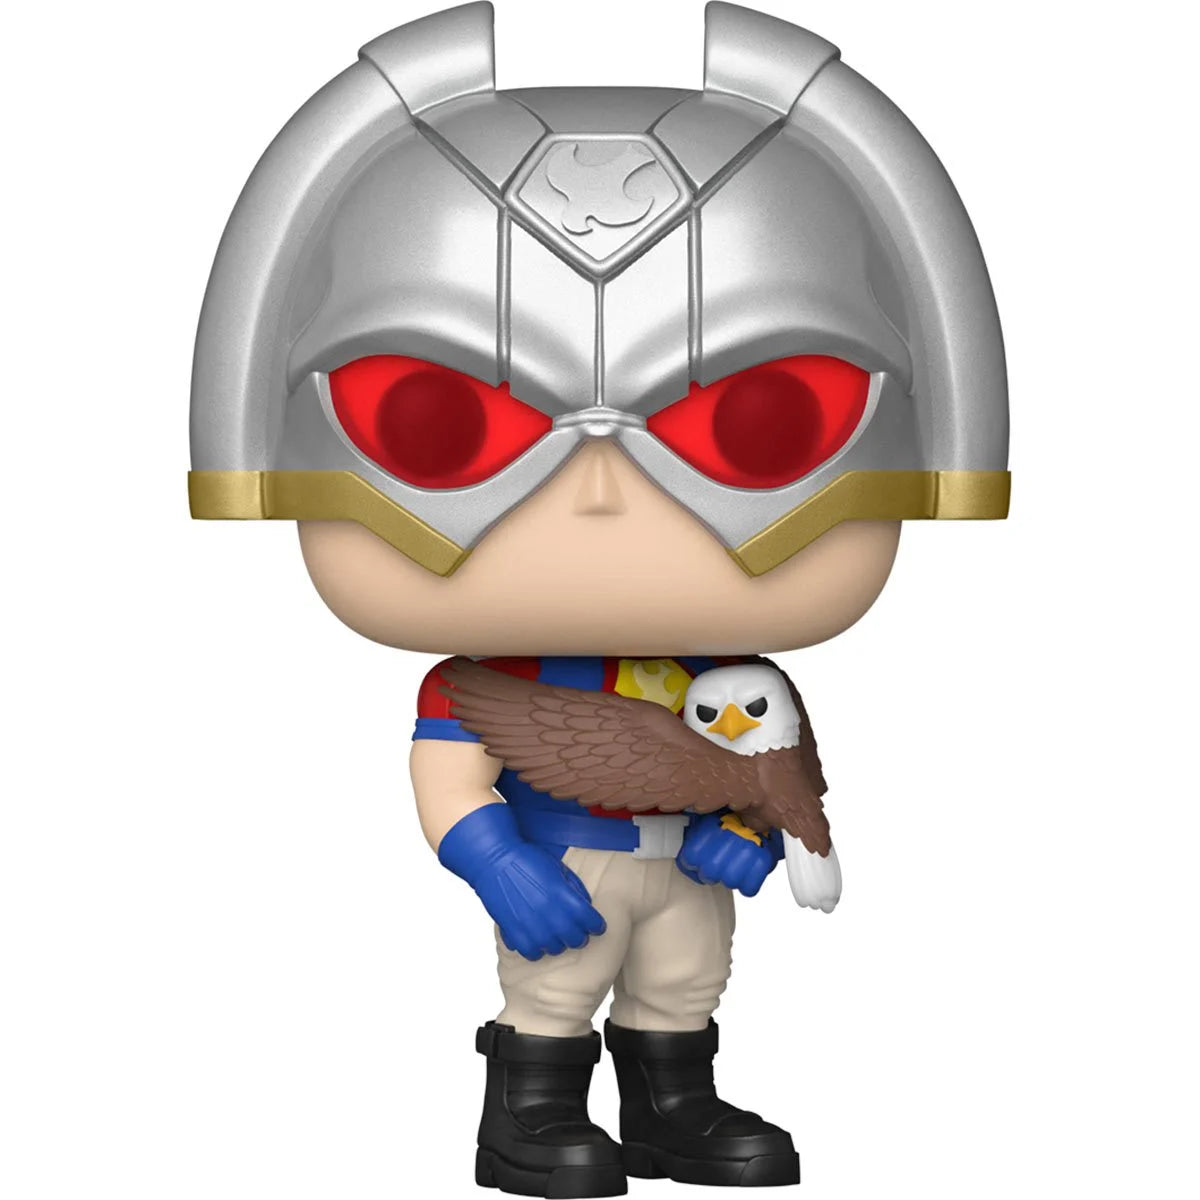 Peacemaker with Eagly Vinyl Figure By Funko Pop!